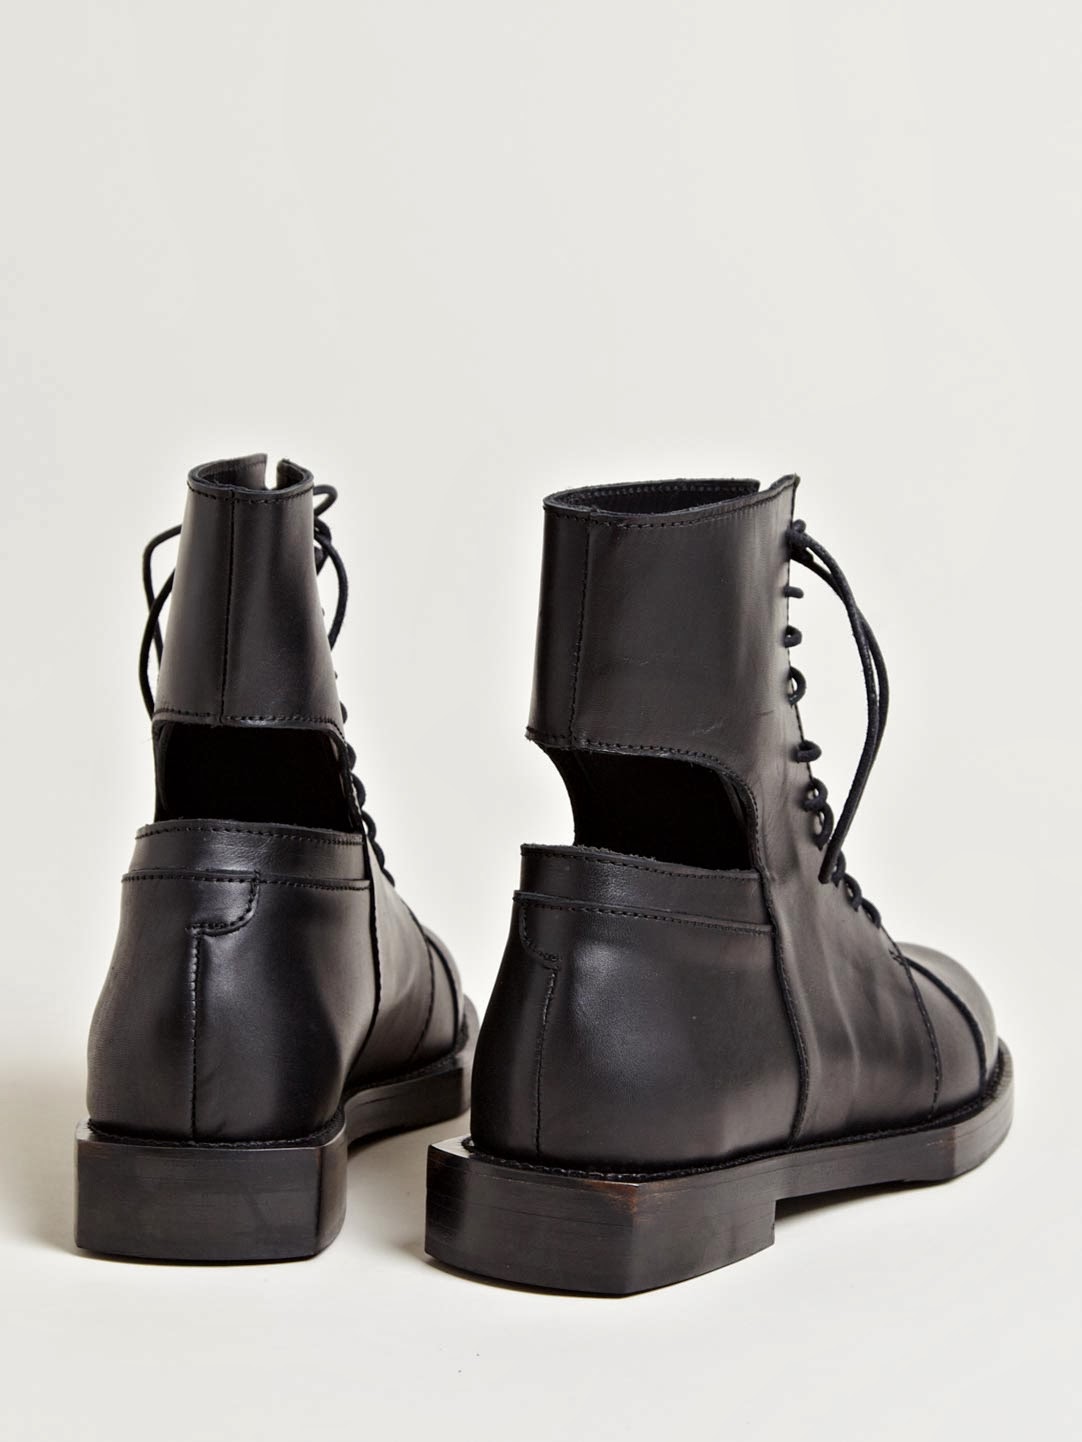 No Rules To Boot: Achilles Ion Gabriel Artor Boots | SHOEOGRAPHY